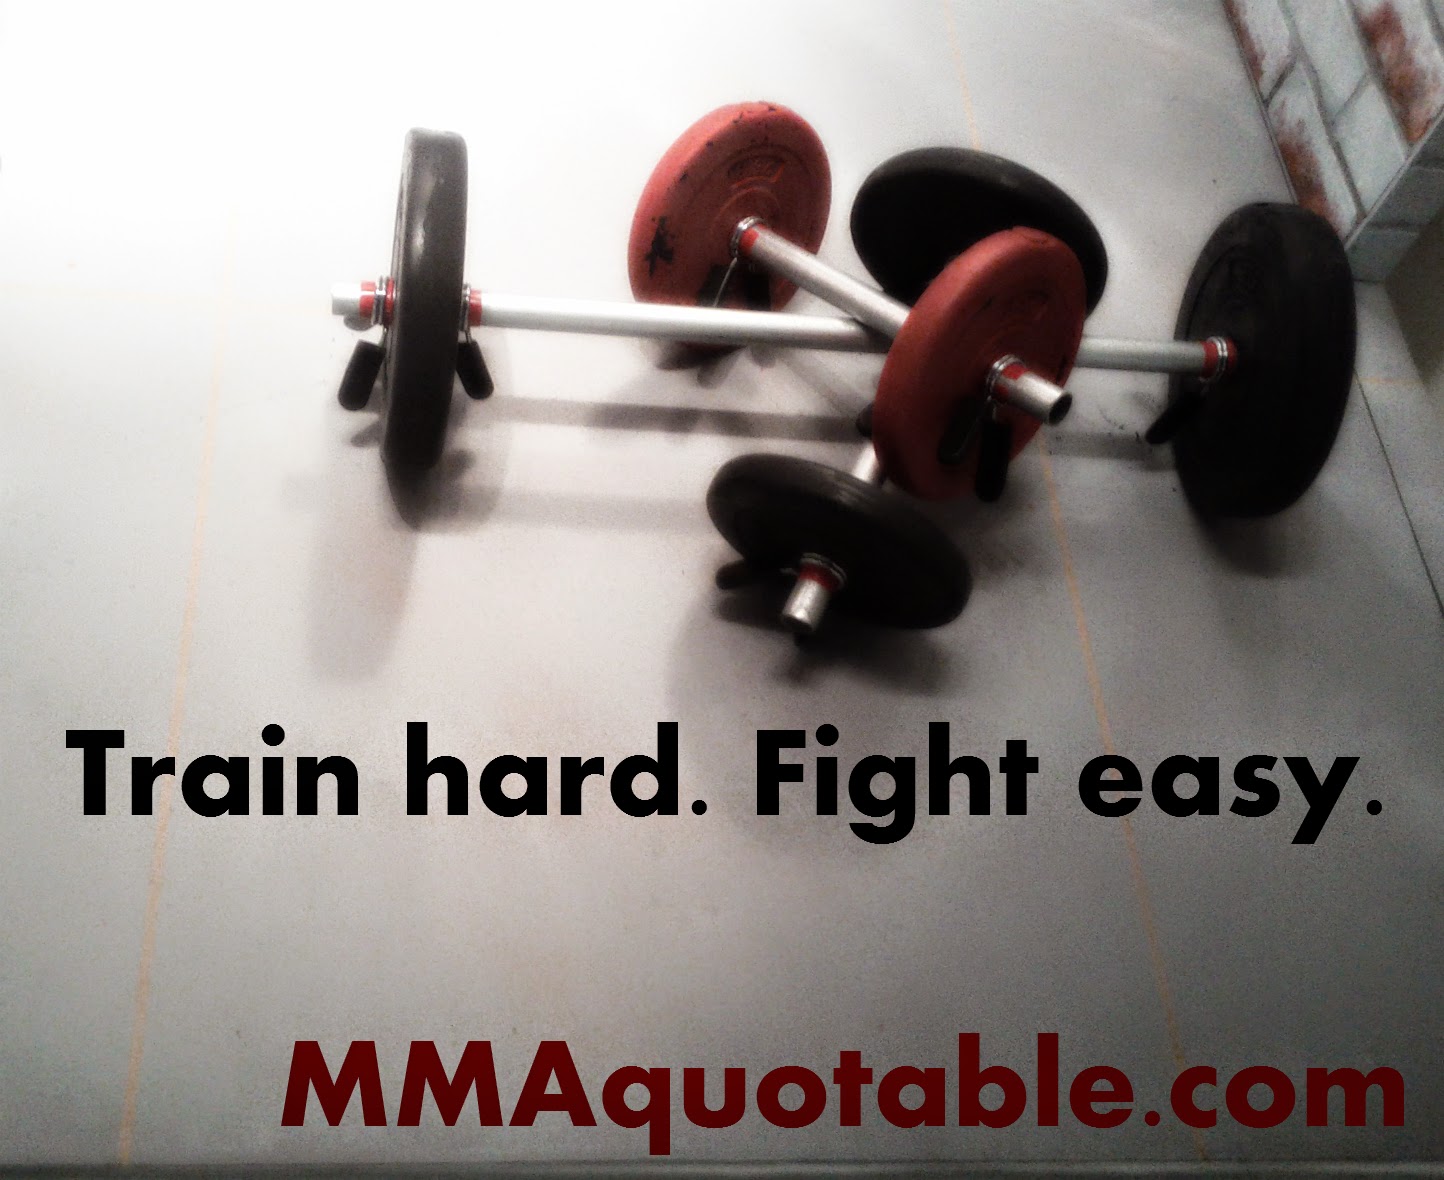 Motivational Quotes With Pictures Many Mma And Ufc Train Hard Fight Easy